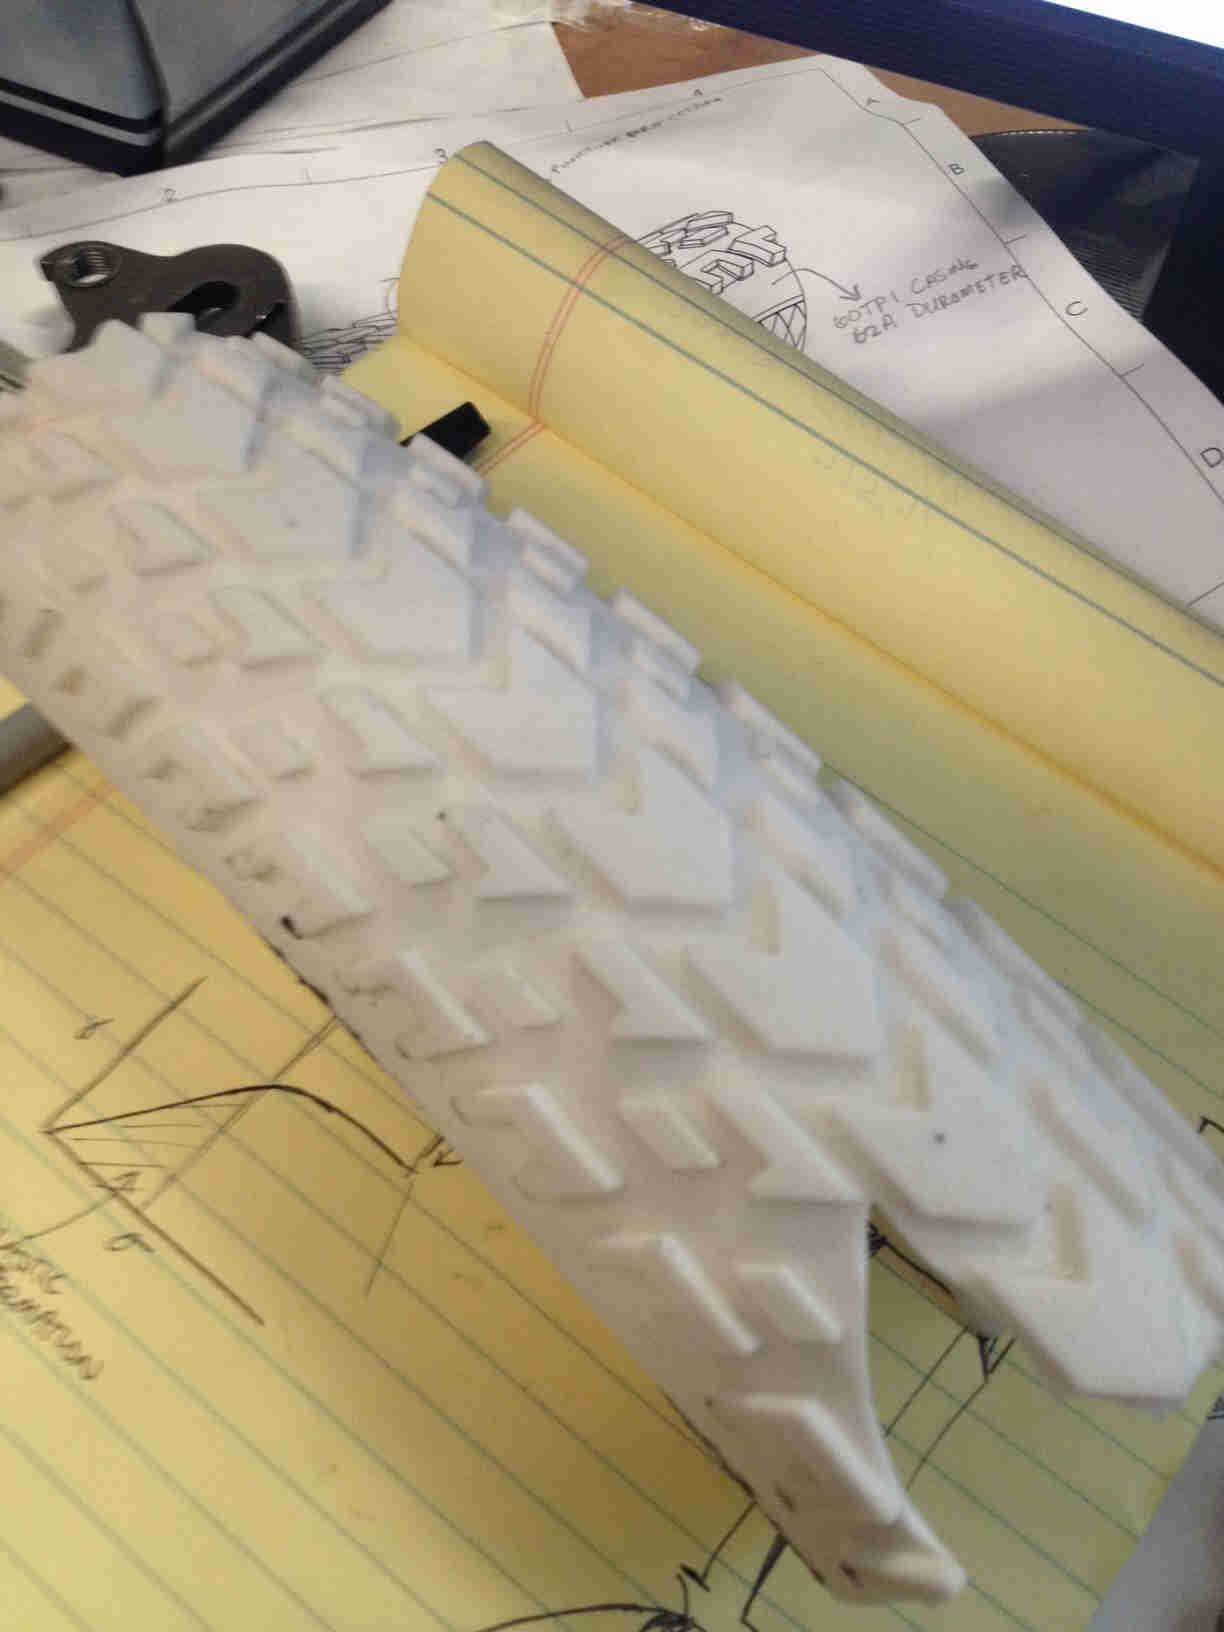 Downward view of a white bike tire cut-out, with the tread facing up, laying across a yellow legal pad - 3rd